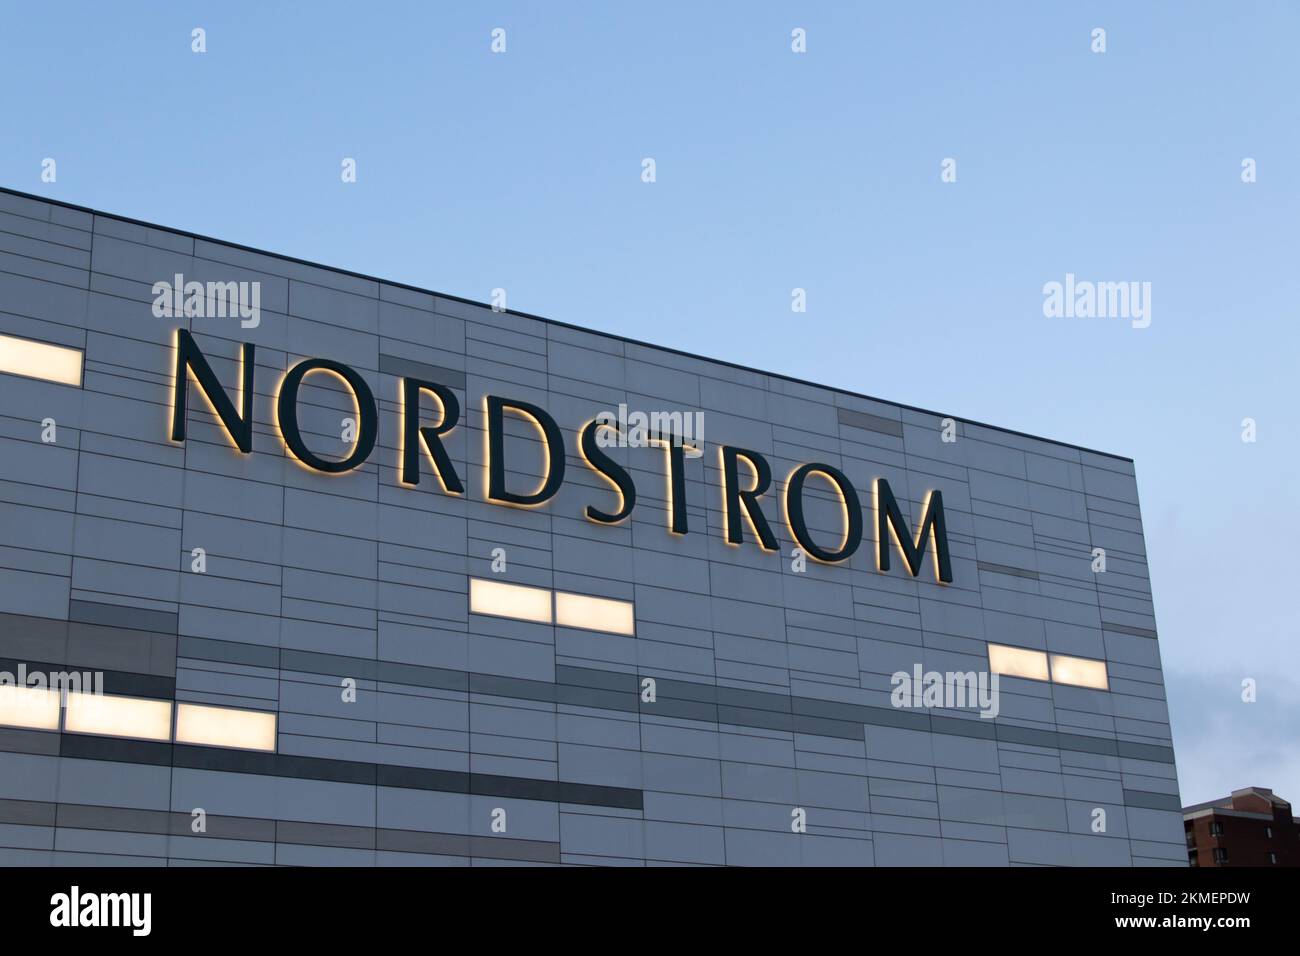 Nordstrom Stock Photos, Royalty Free Nordstrom Images